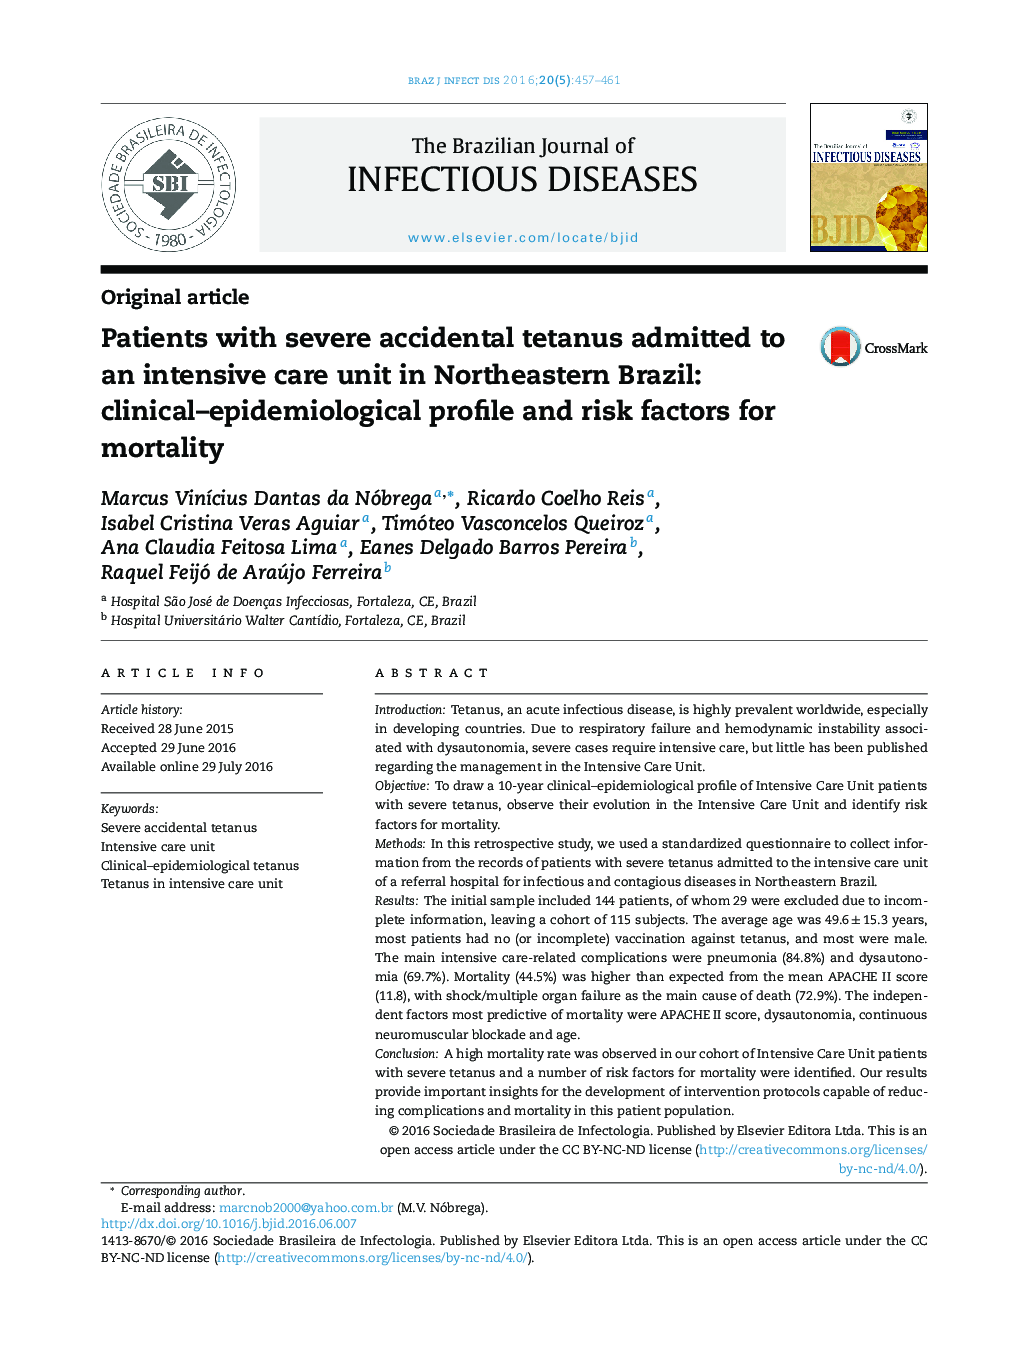 Patients with severe accidental tetanus admitted to an intensive care unit in Northeastern Brazil: clinical–epidemiological profile and risk factors for mortality